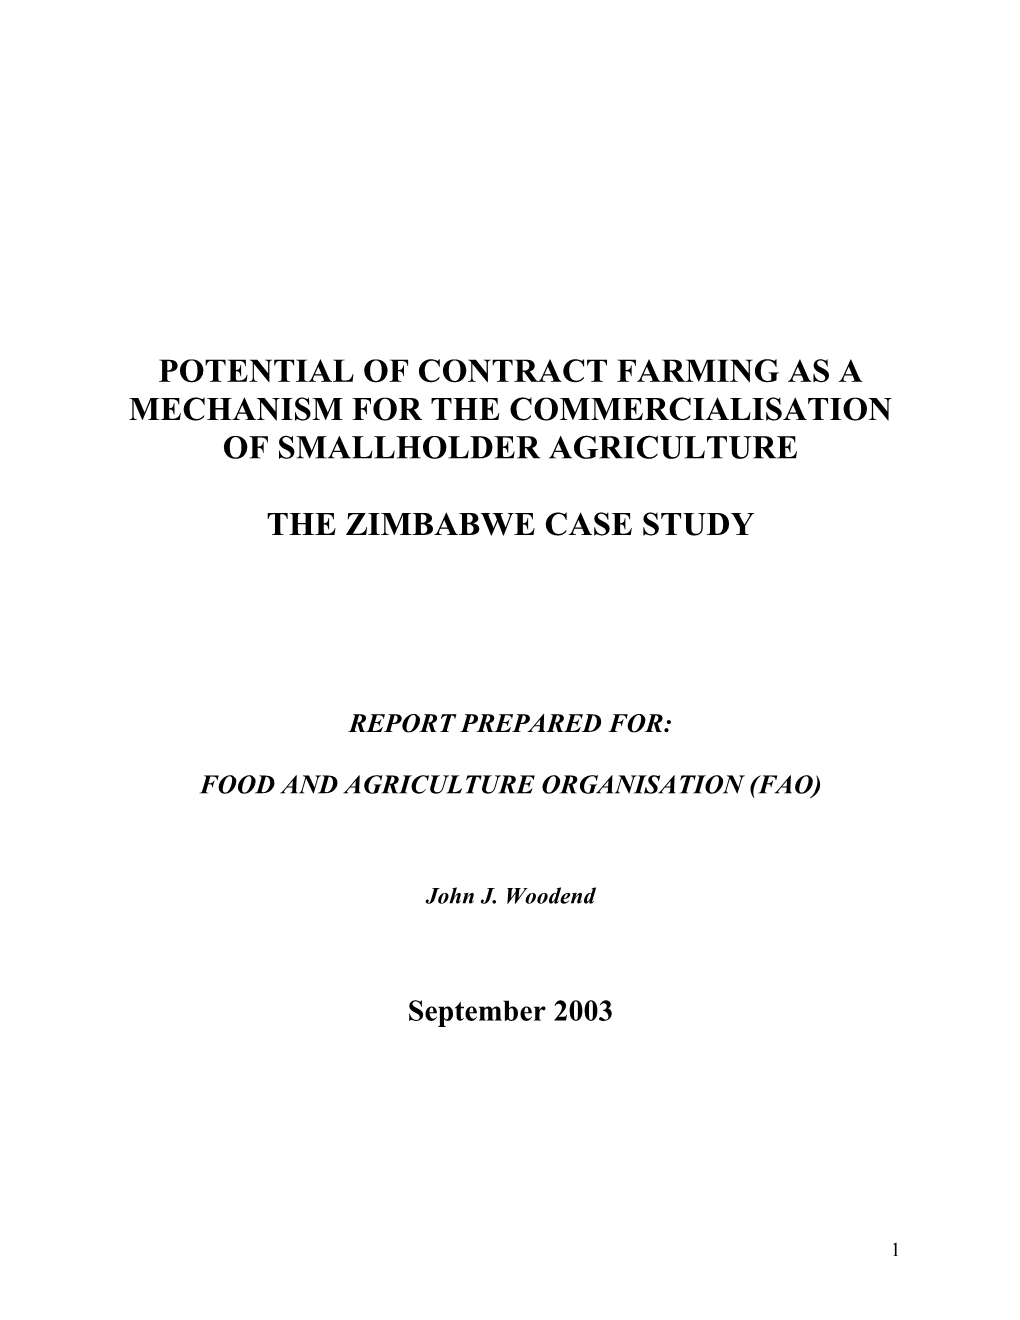 Potential of Contract Farming As a Mechanism for the Commercialisation of Smallholder Agriculture